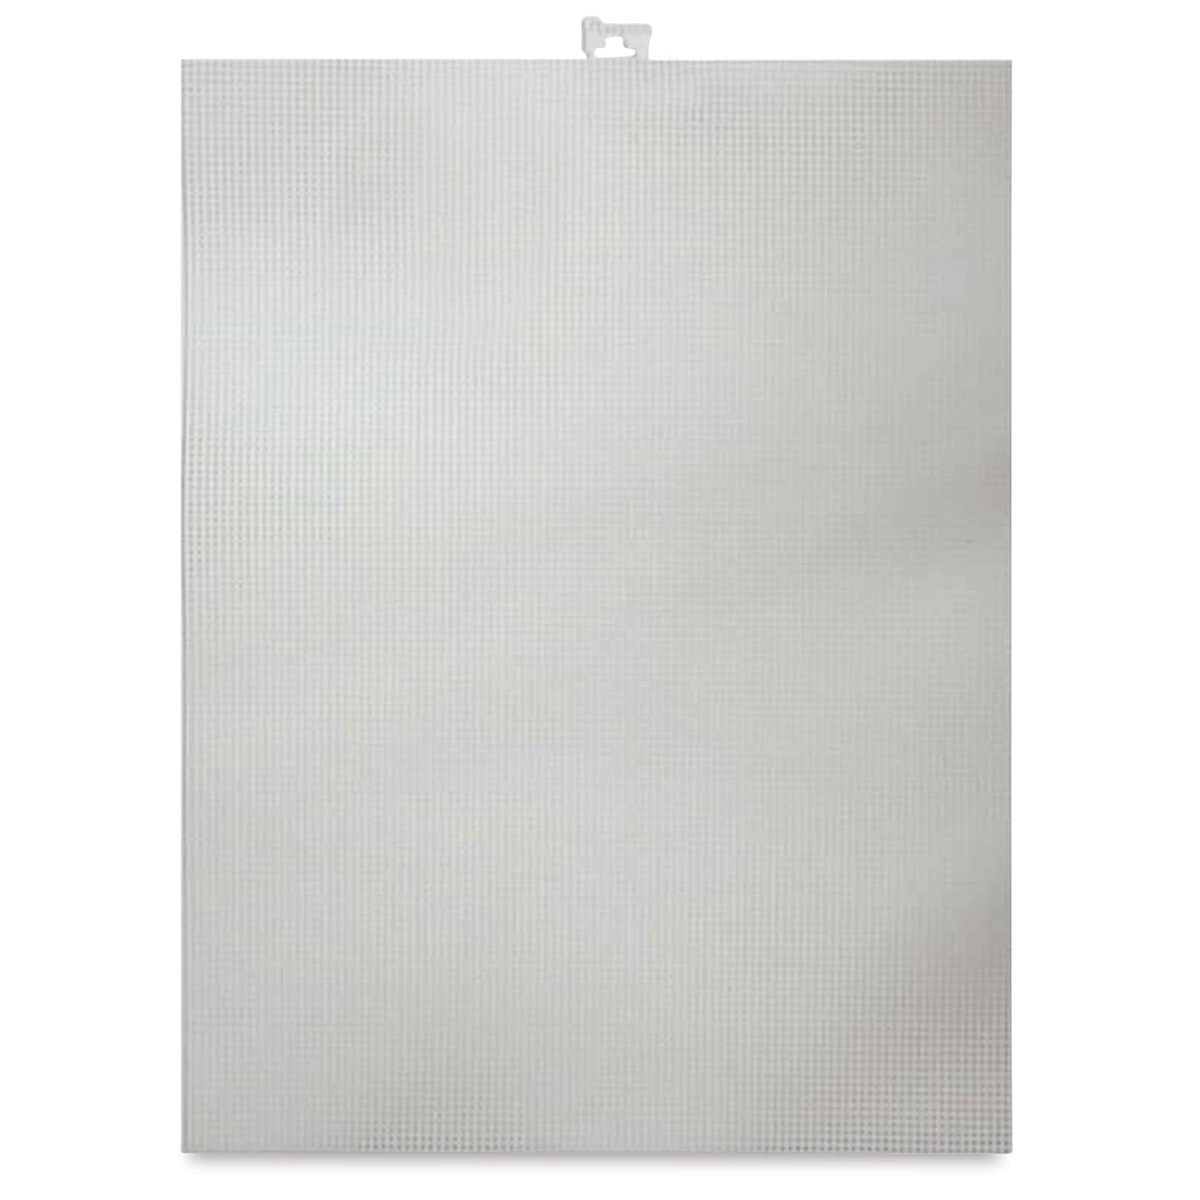 Needle Crafters Plastic Canvas - White, 10-1/2 W x 13-1/2 L